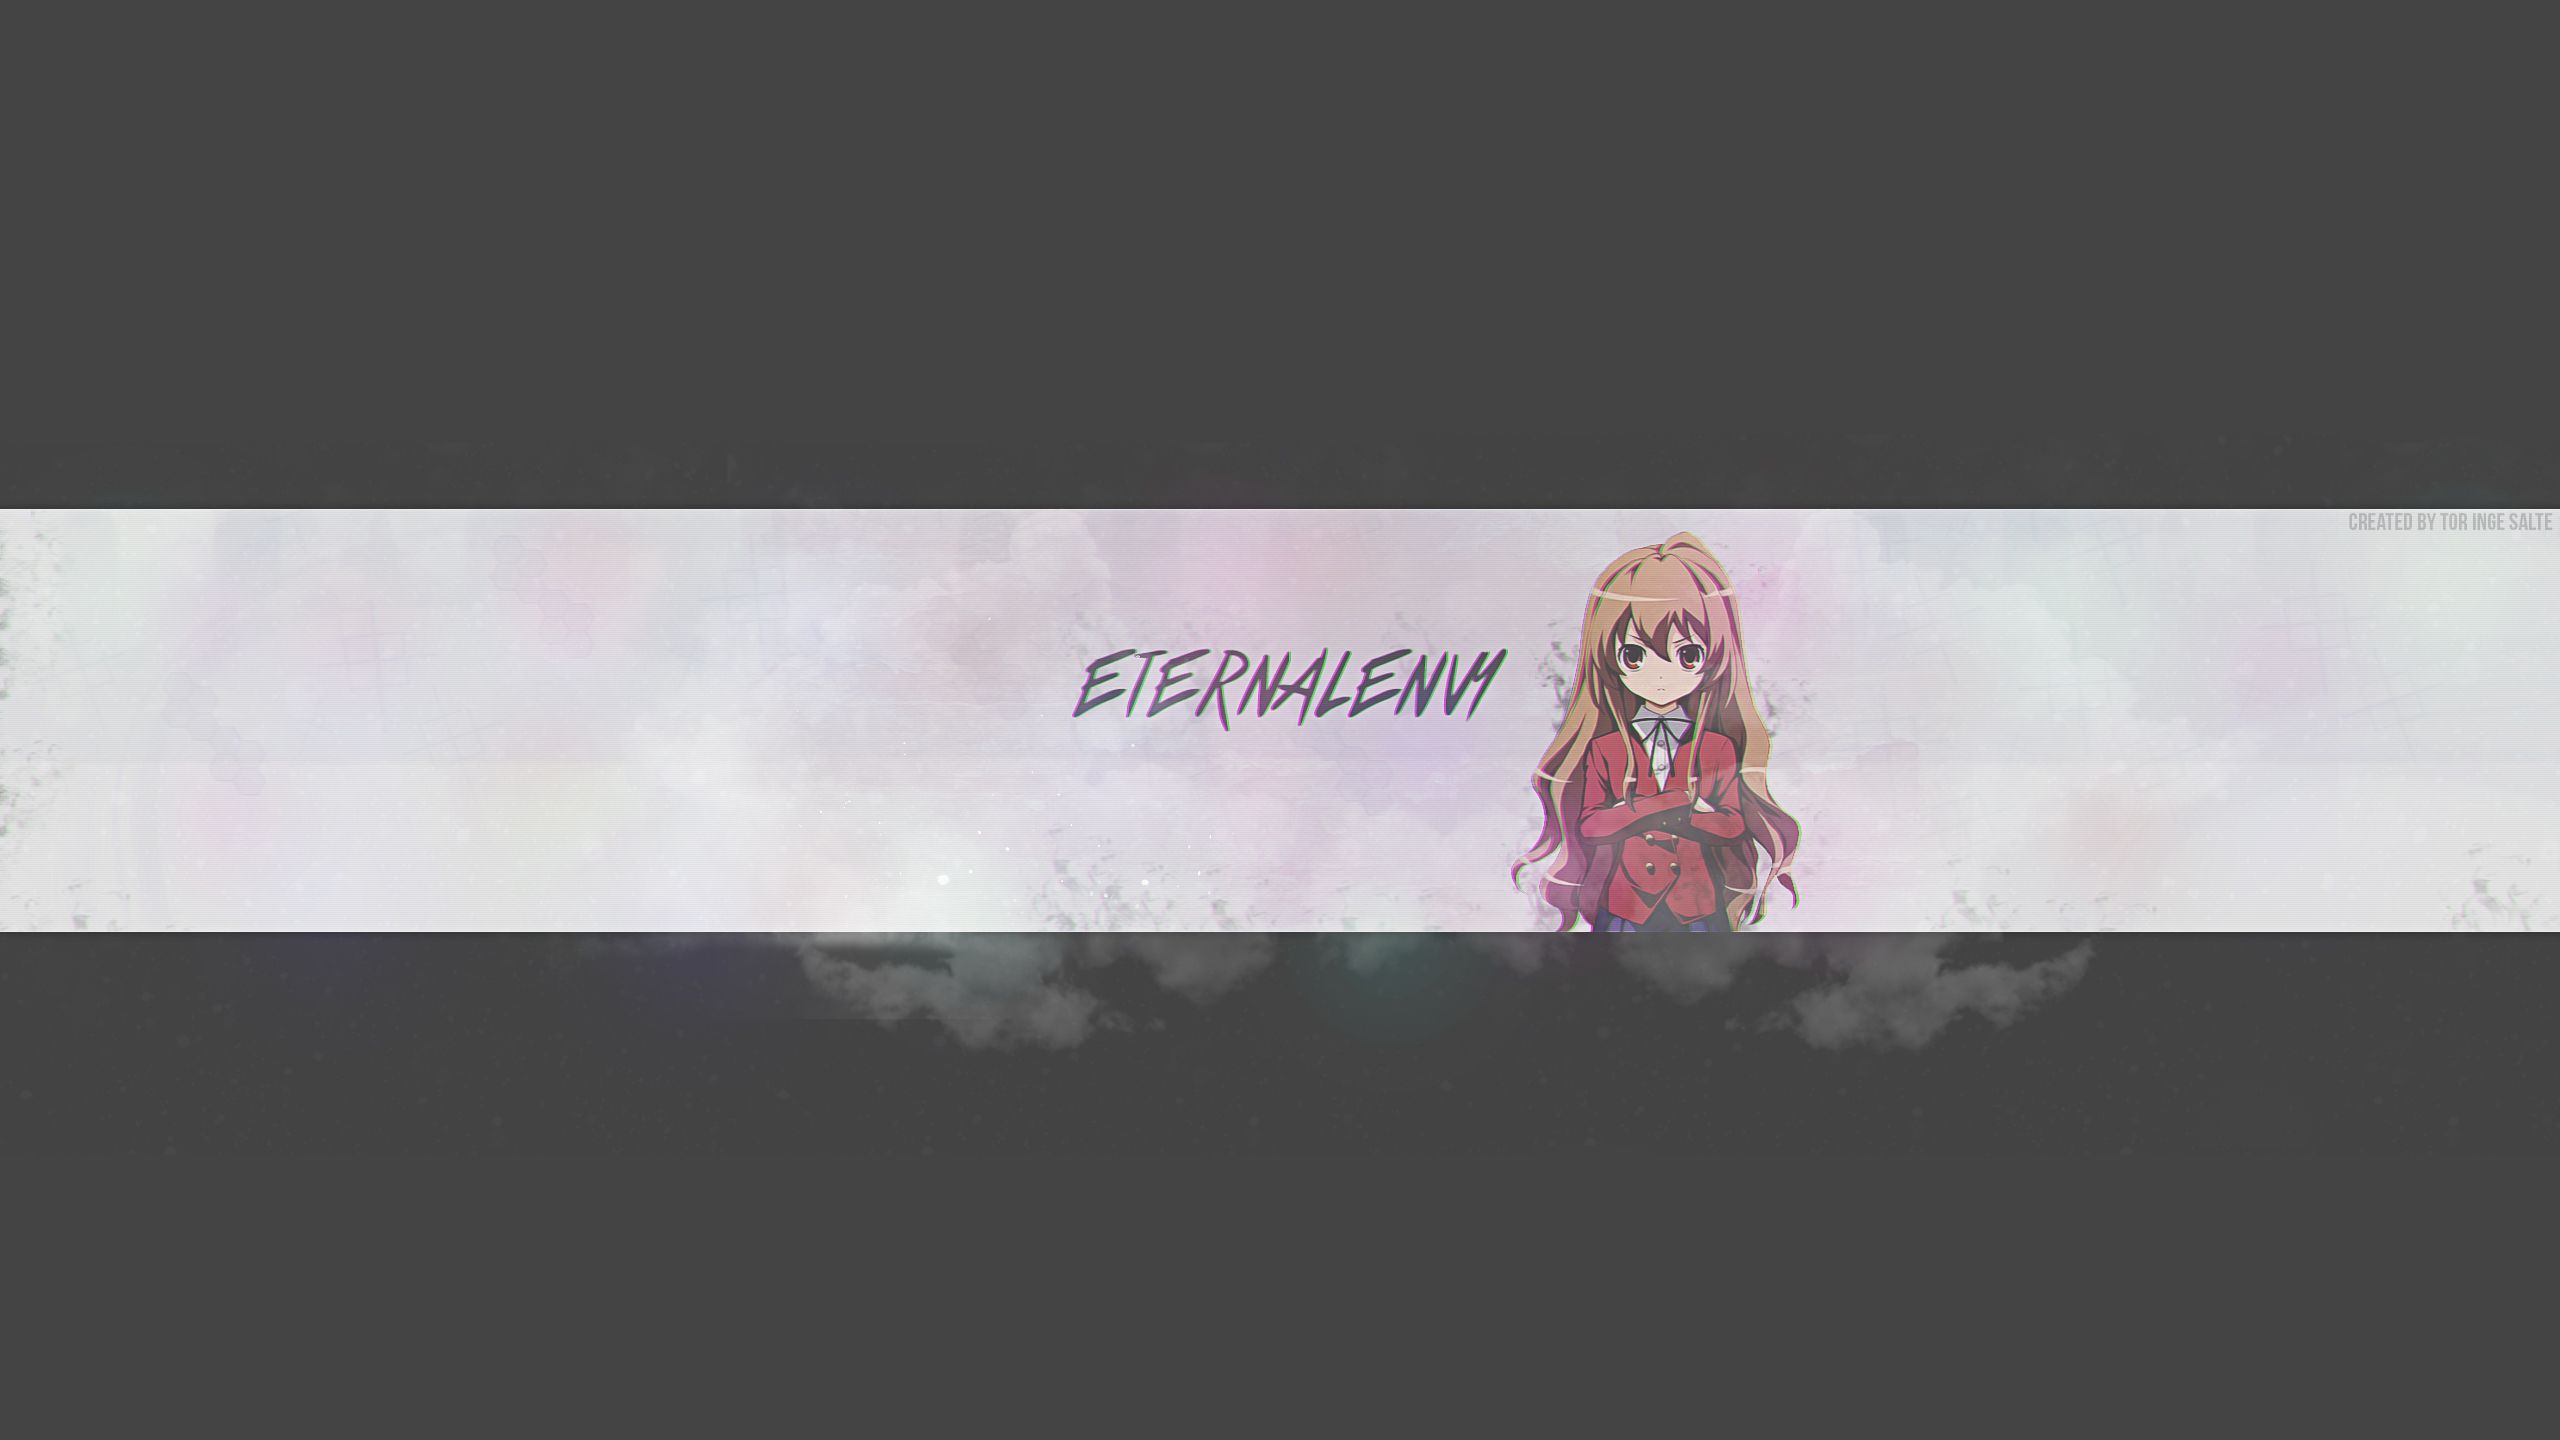  ᨳ Banner Welcome  Twitter header pink Aesthetic anime Cute banners